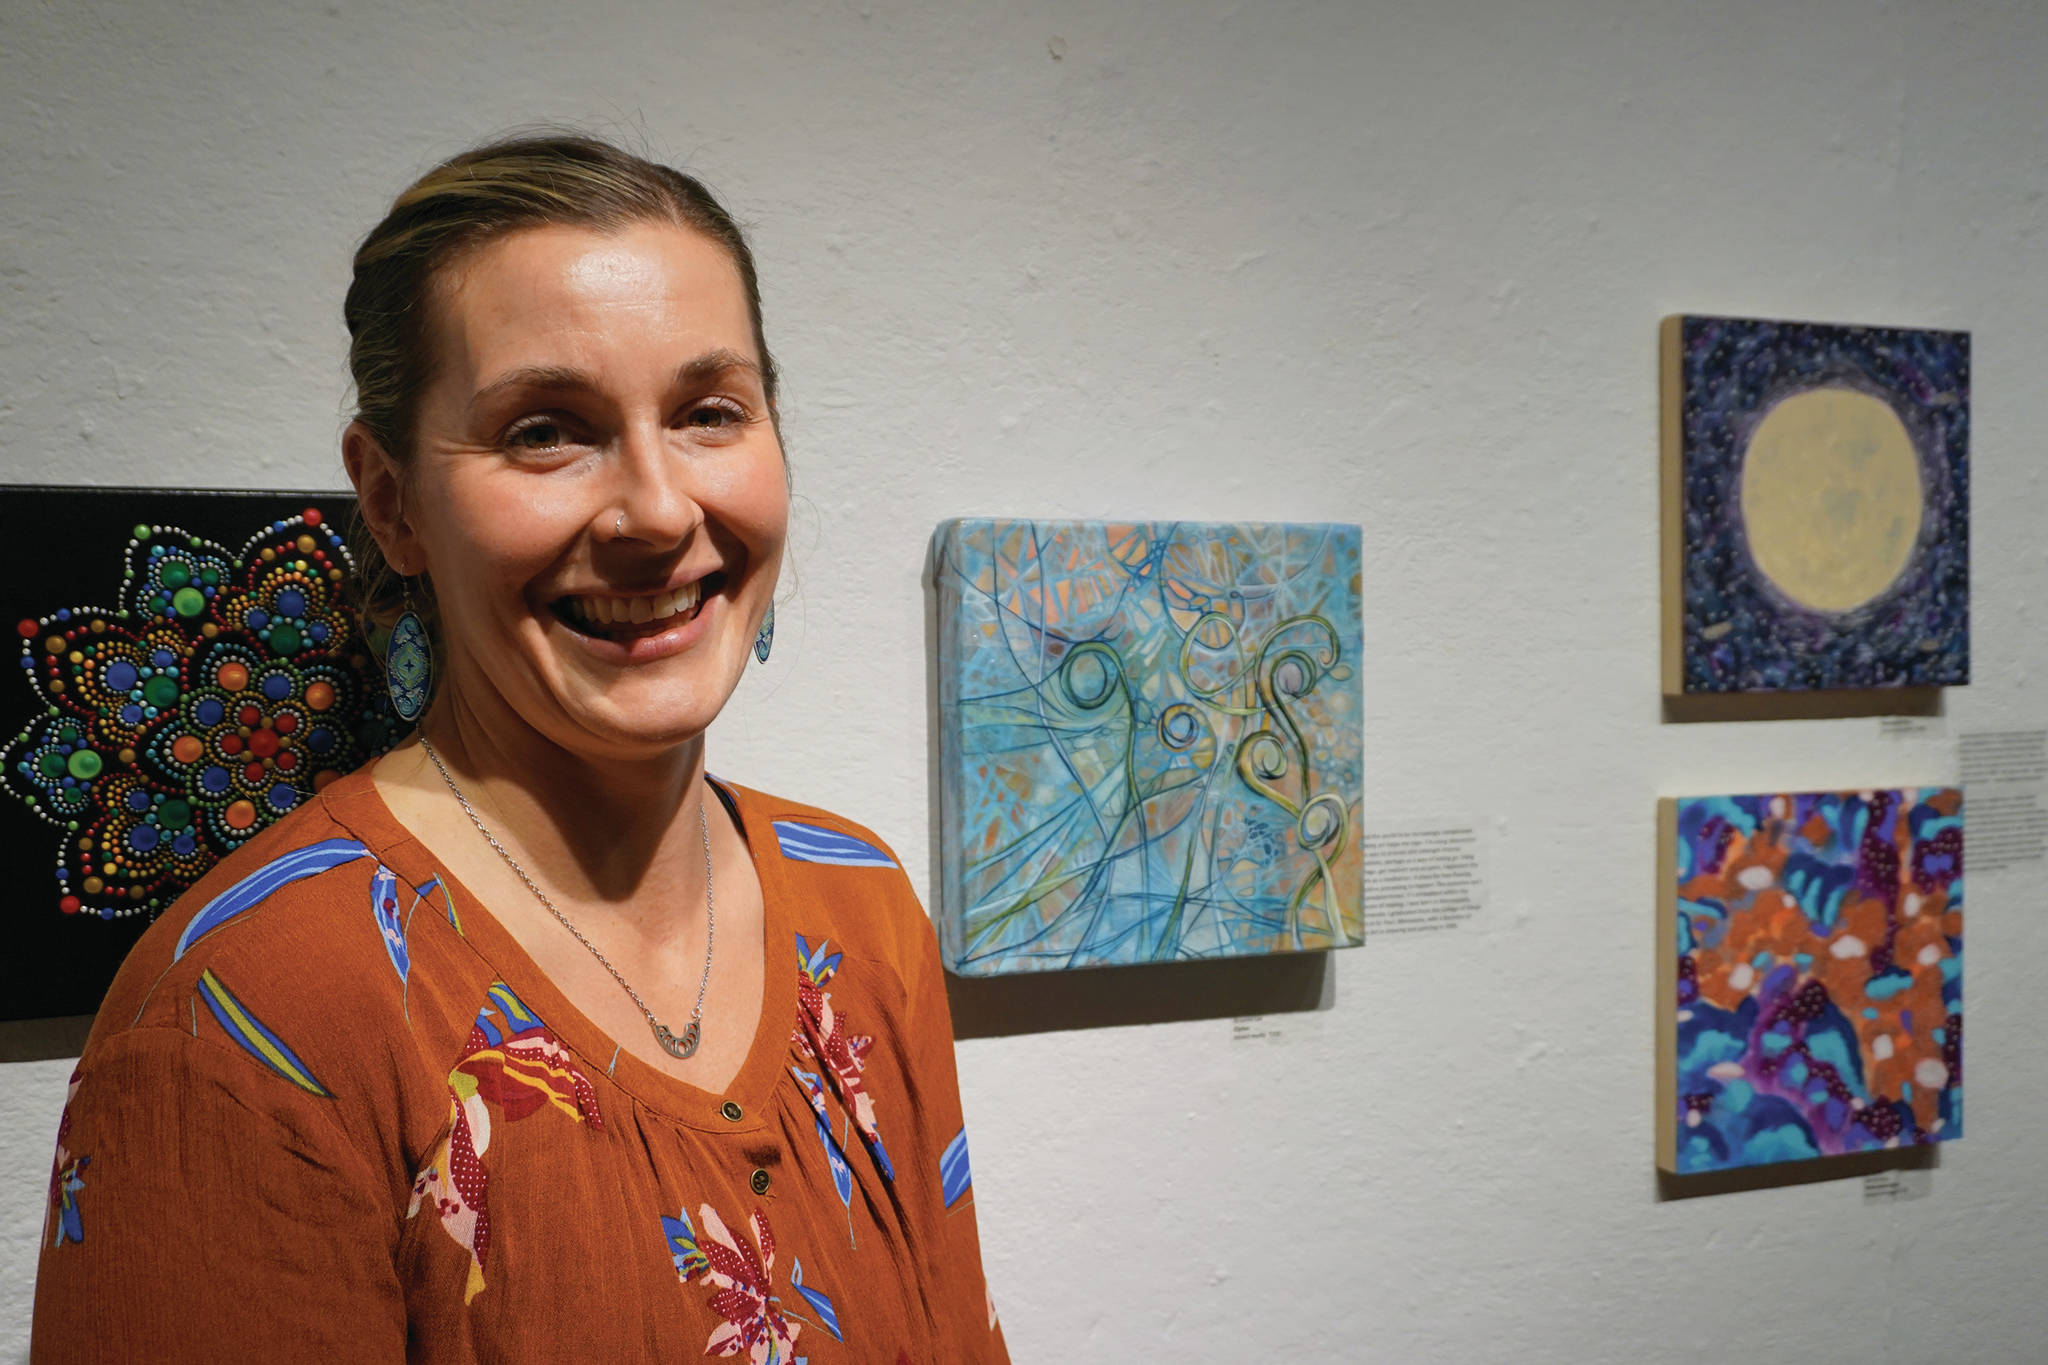 Brianna Lee stands by her painting, “Cipher,” one of the works of art in the 10x10 show at Bunnell Street Arts Center that opened on Nov. 8, 2019, in Homer, Alaska. (Photo by Michael Armstrong/Homer News)